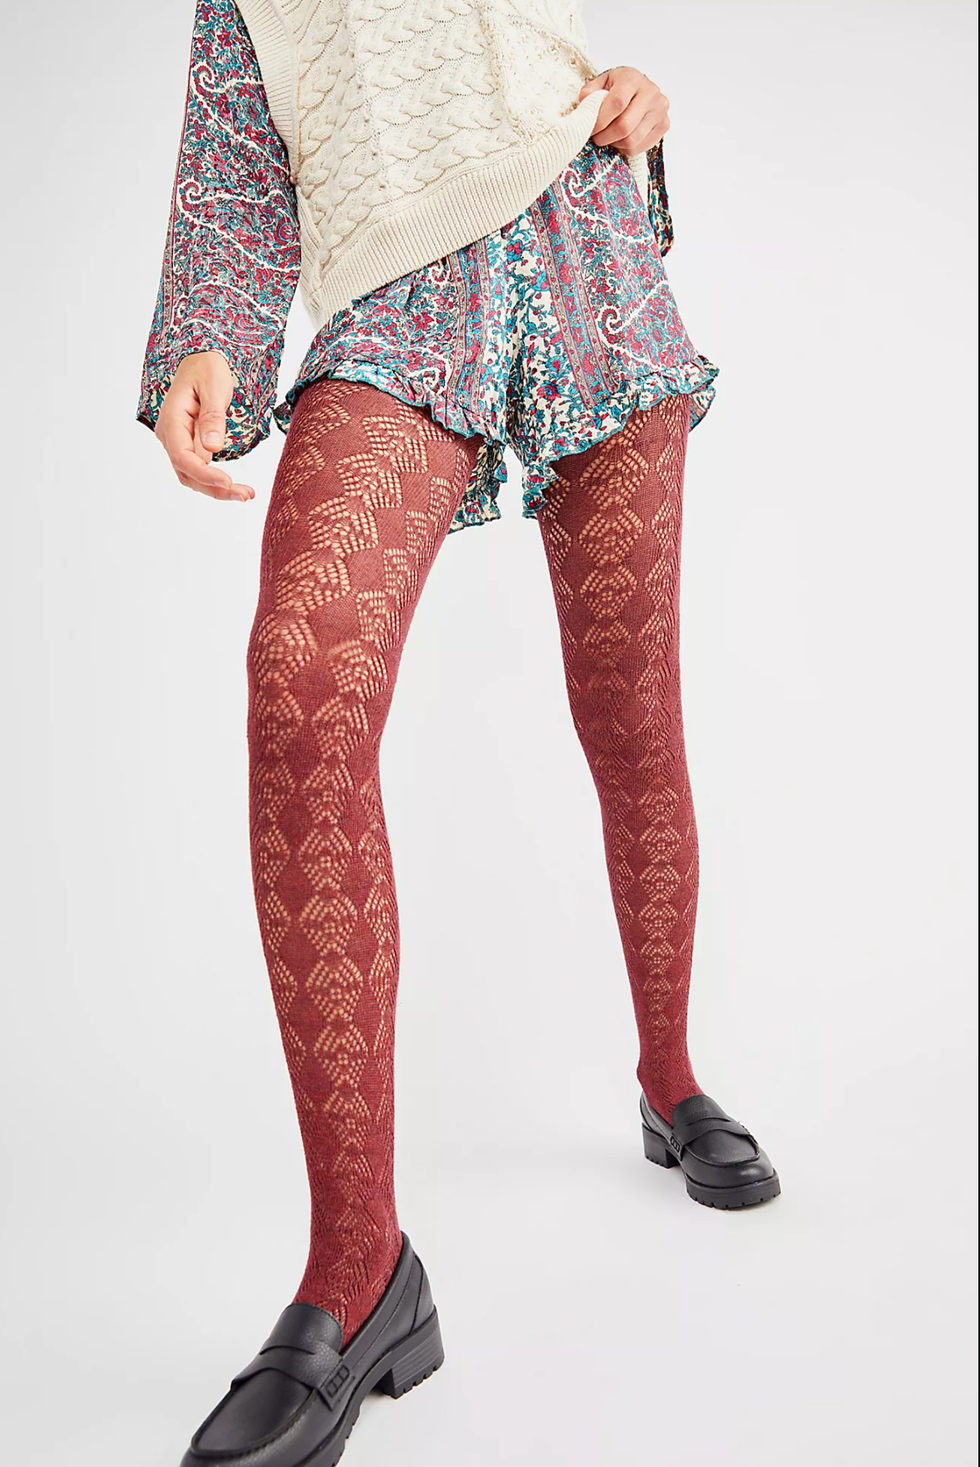 Floral Lace Mesh Tights - Calzedonia